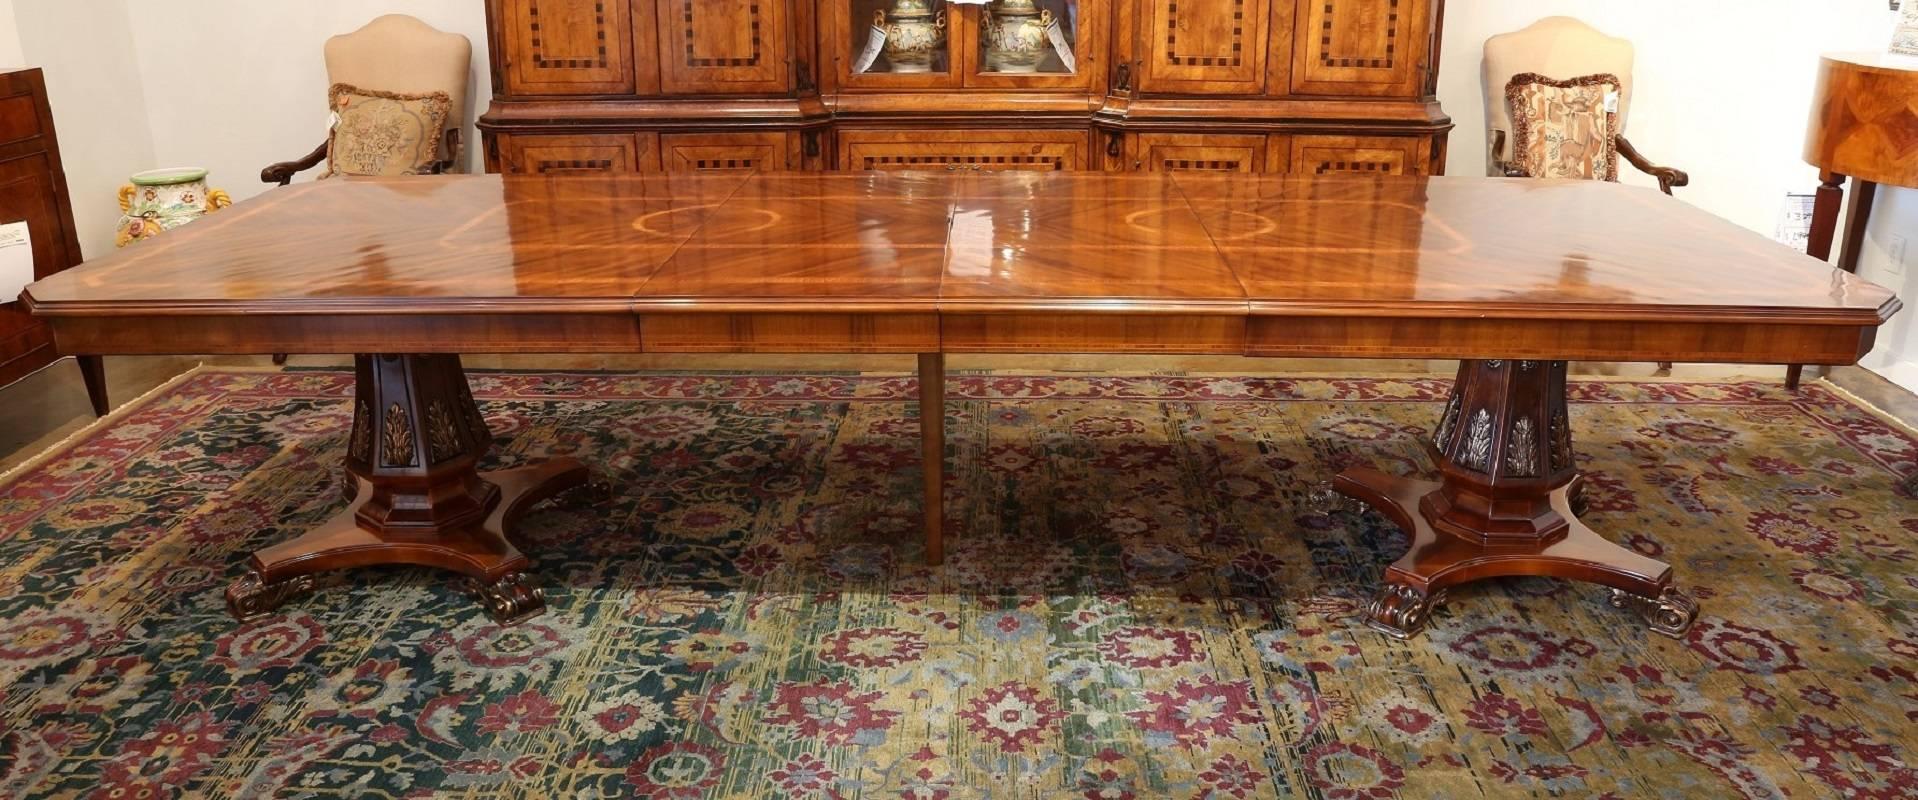 Hand-Carved 19th Century Style Rectangle Dining Table designed by Renaissance Collection